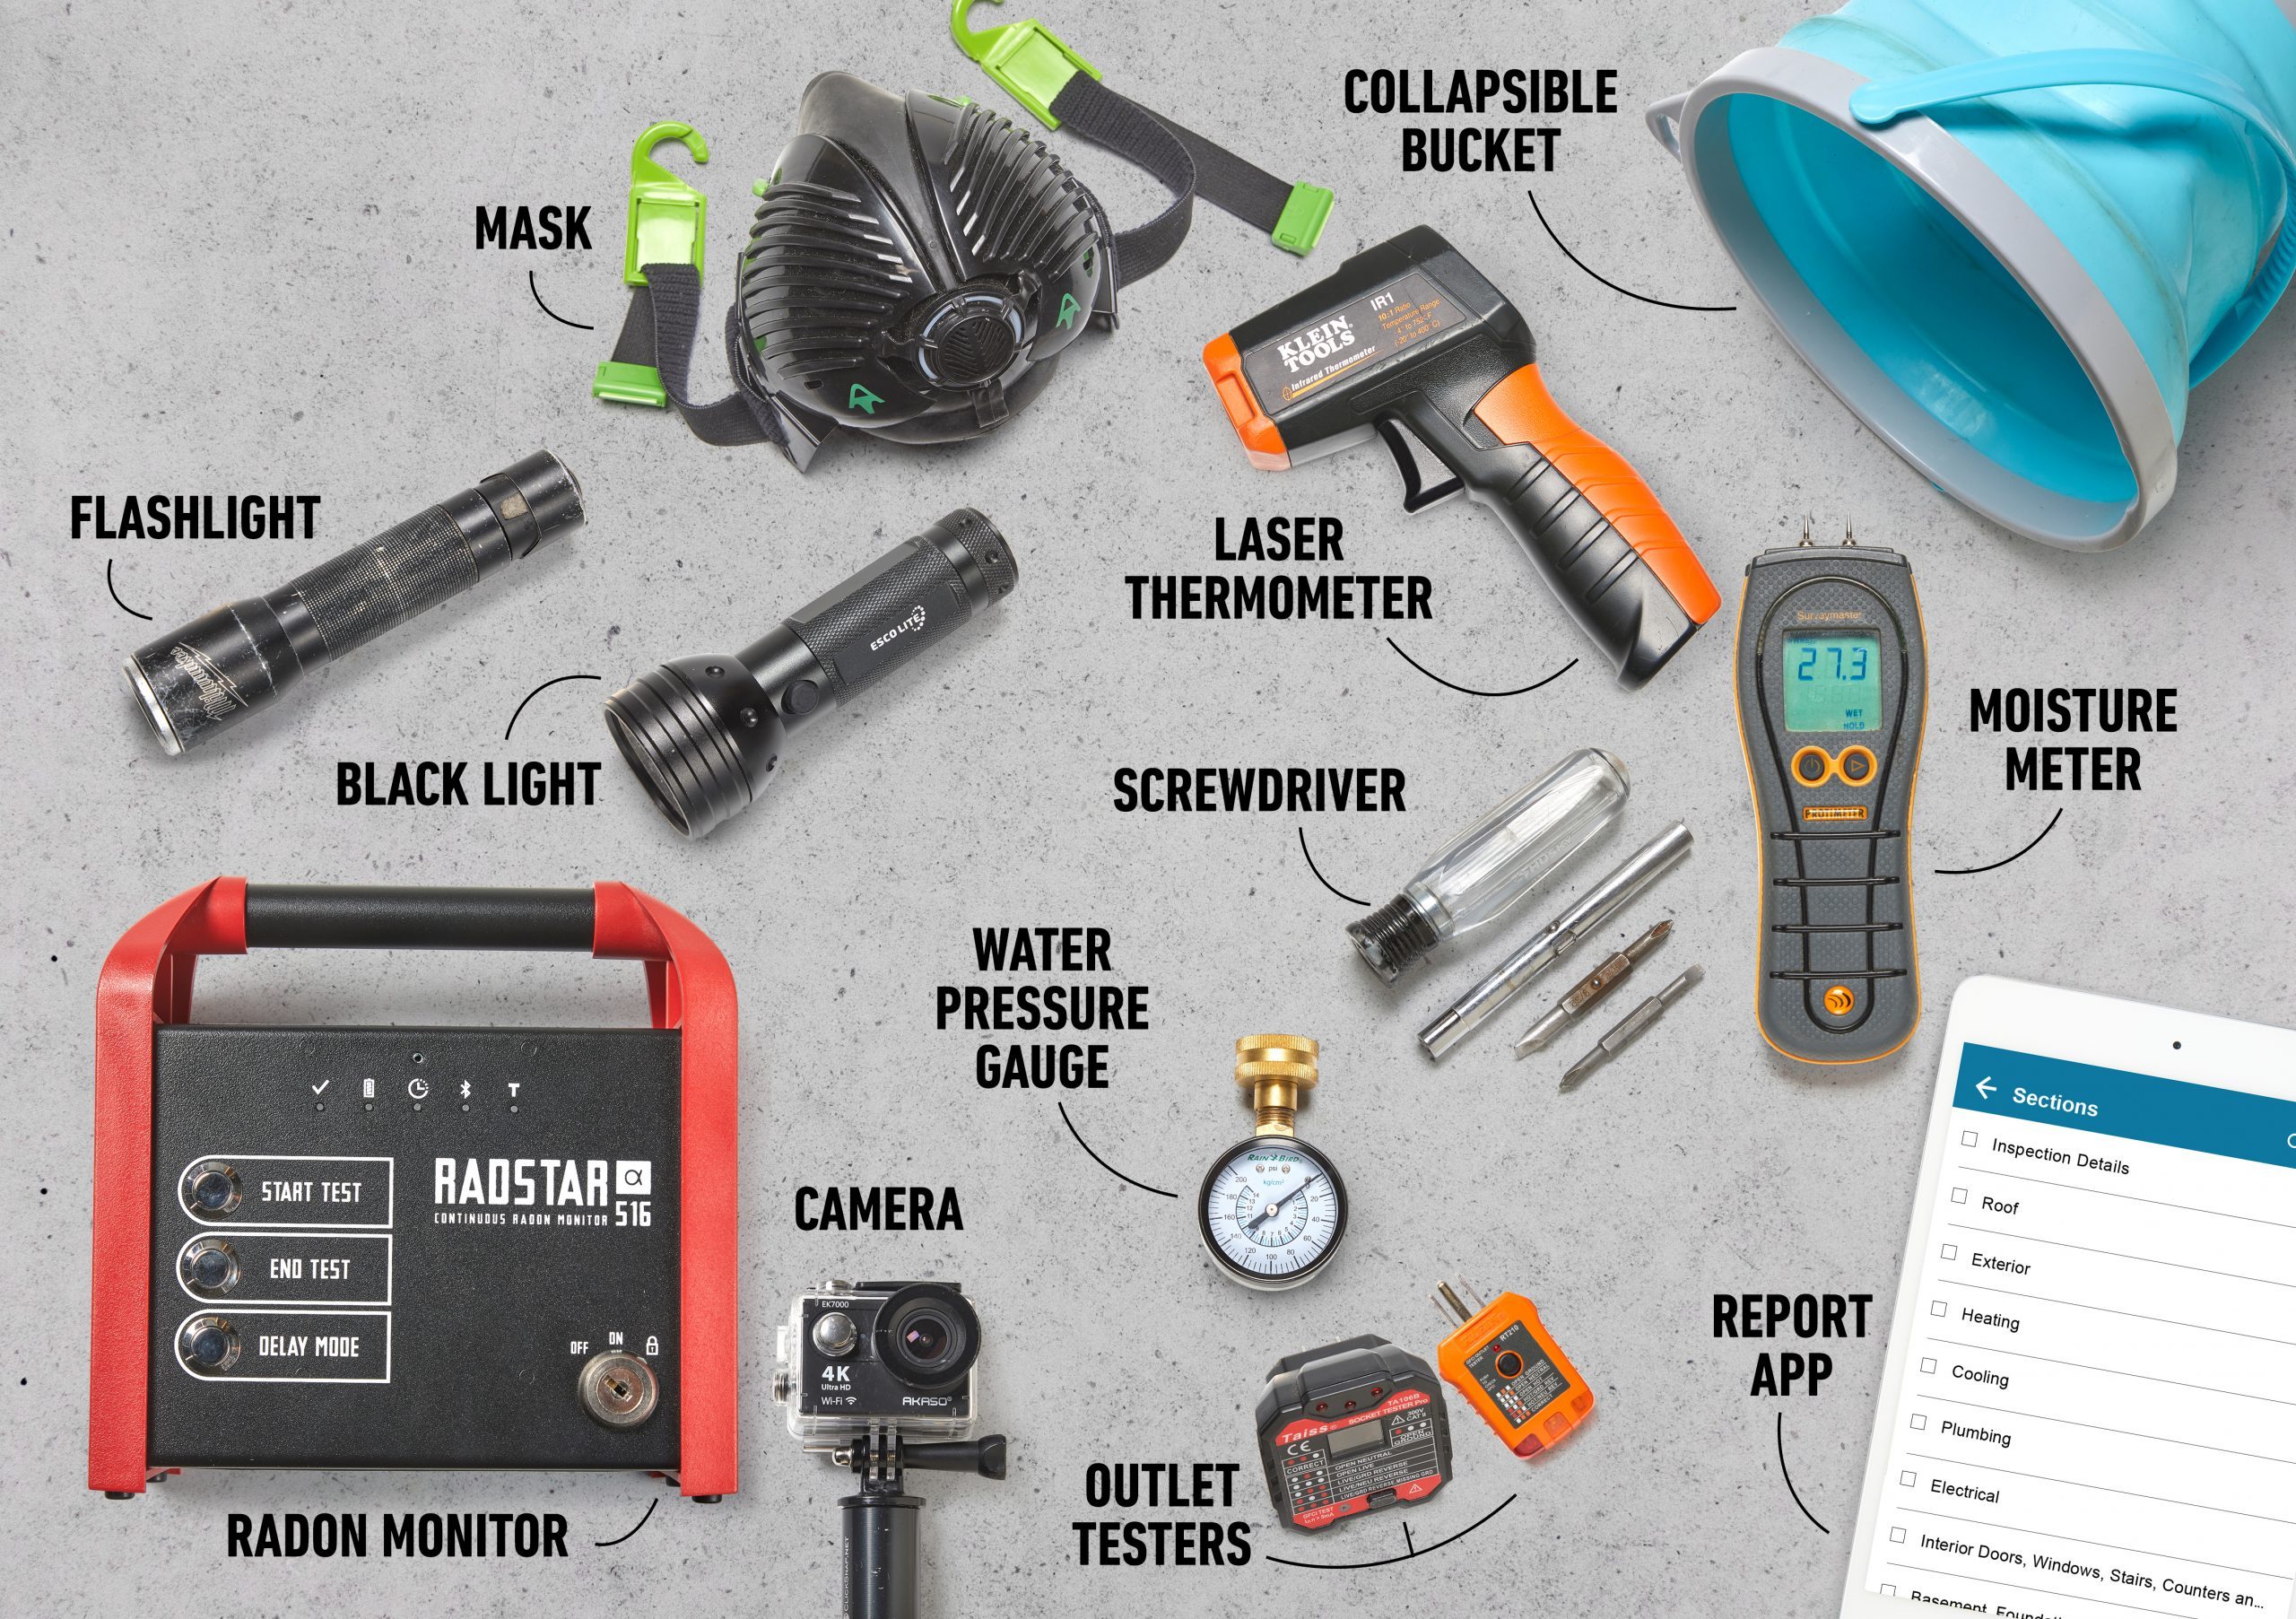 Home Inspection Tools List and Equipment